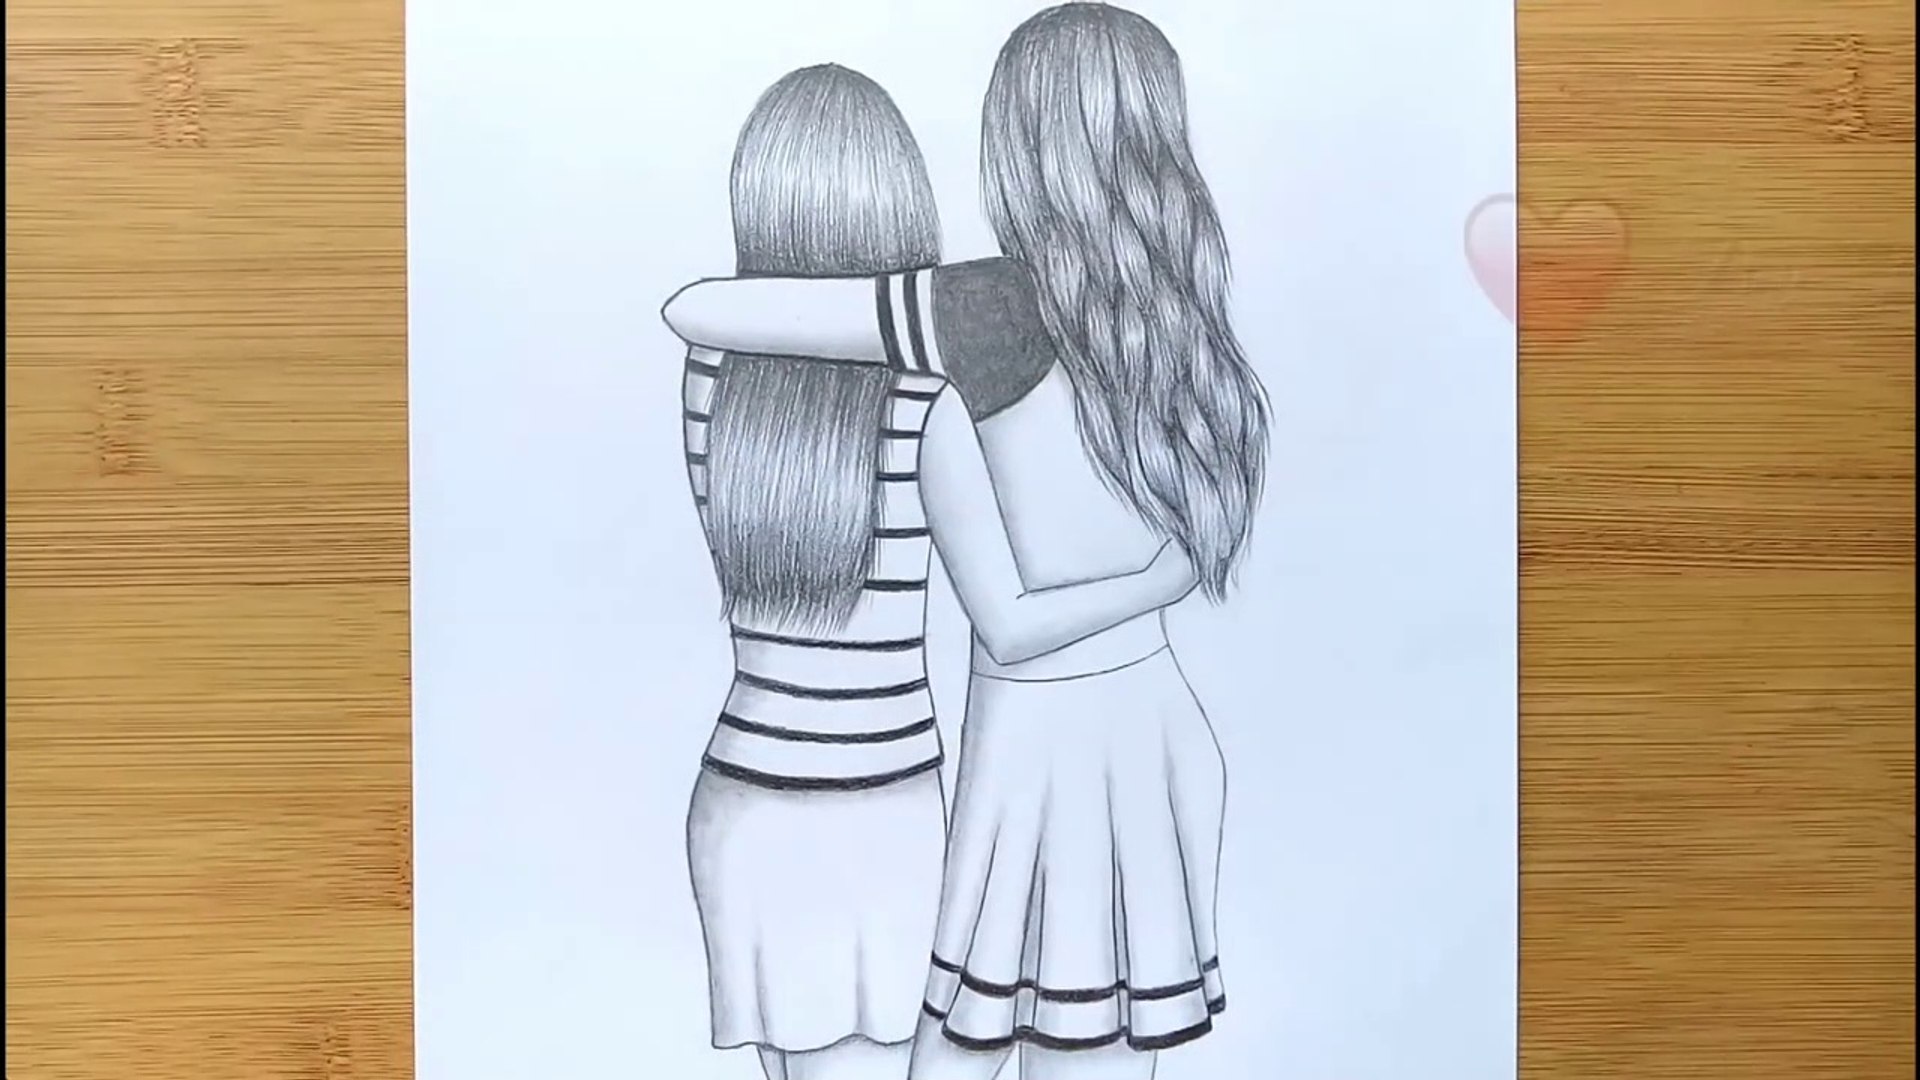 Best Friends Pencil Sketch Tutorial How To Draw Two Friends Hugging Each Other Video Dailymotion